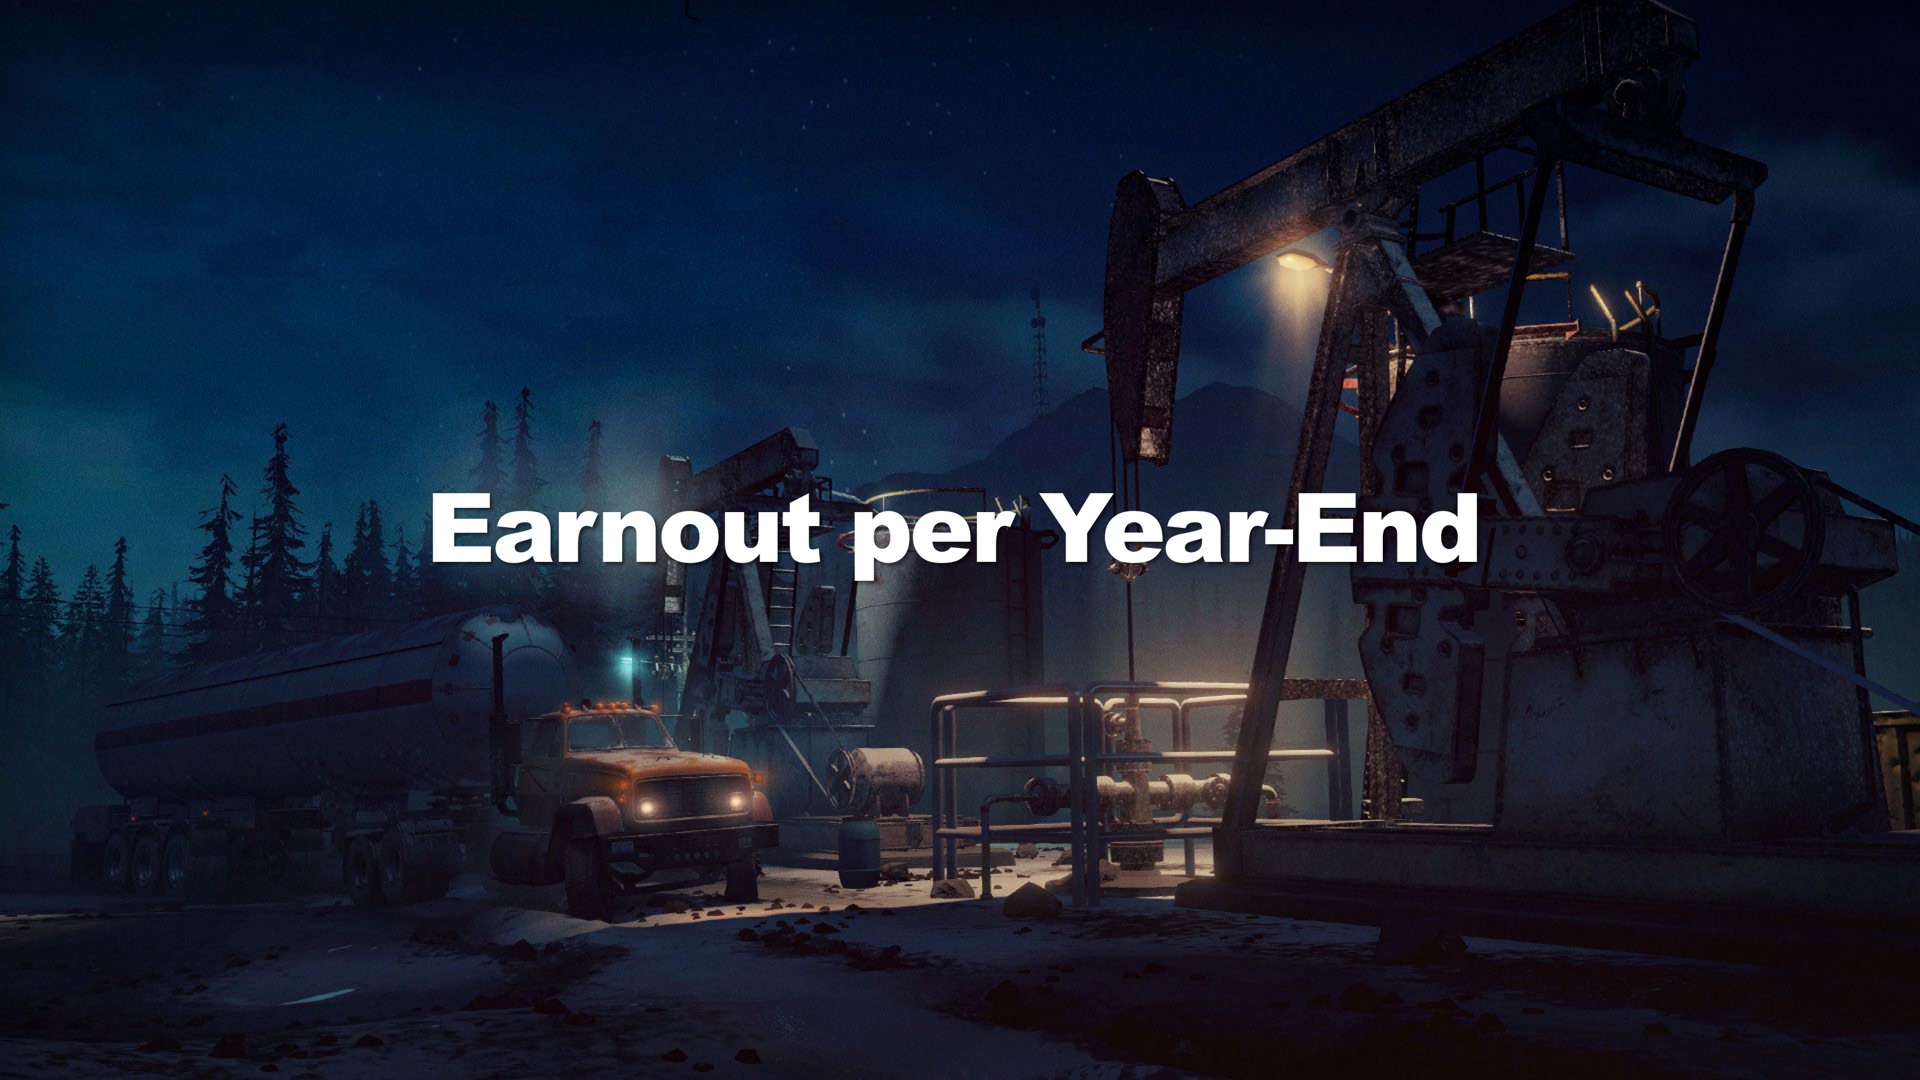 per year end i | Embracer Group